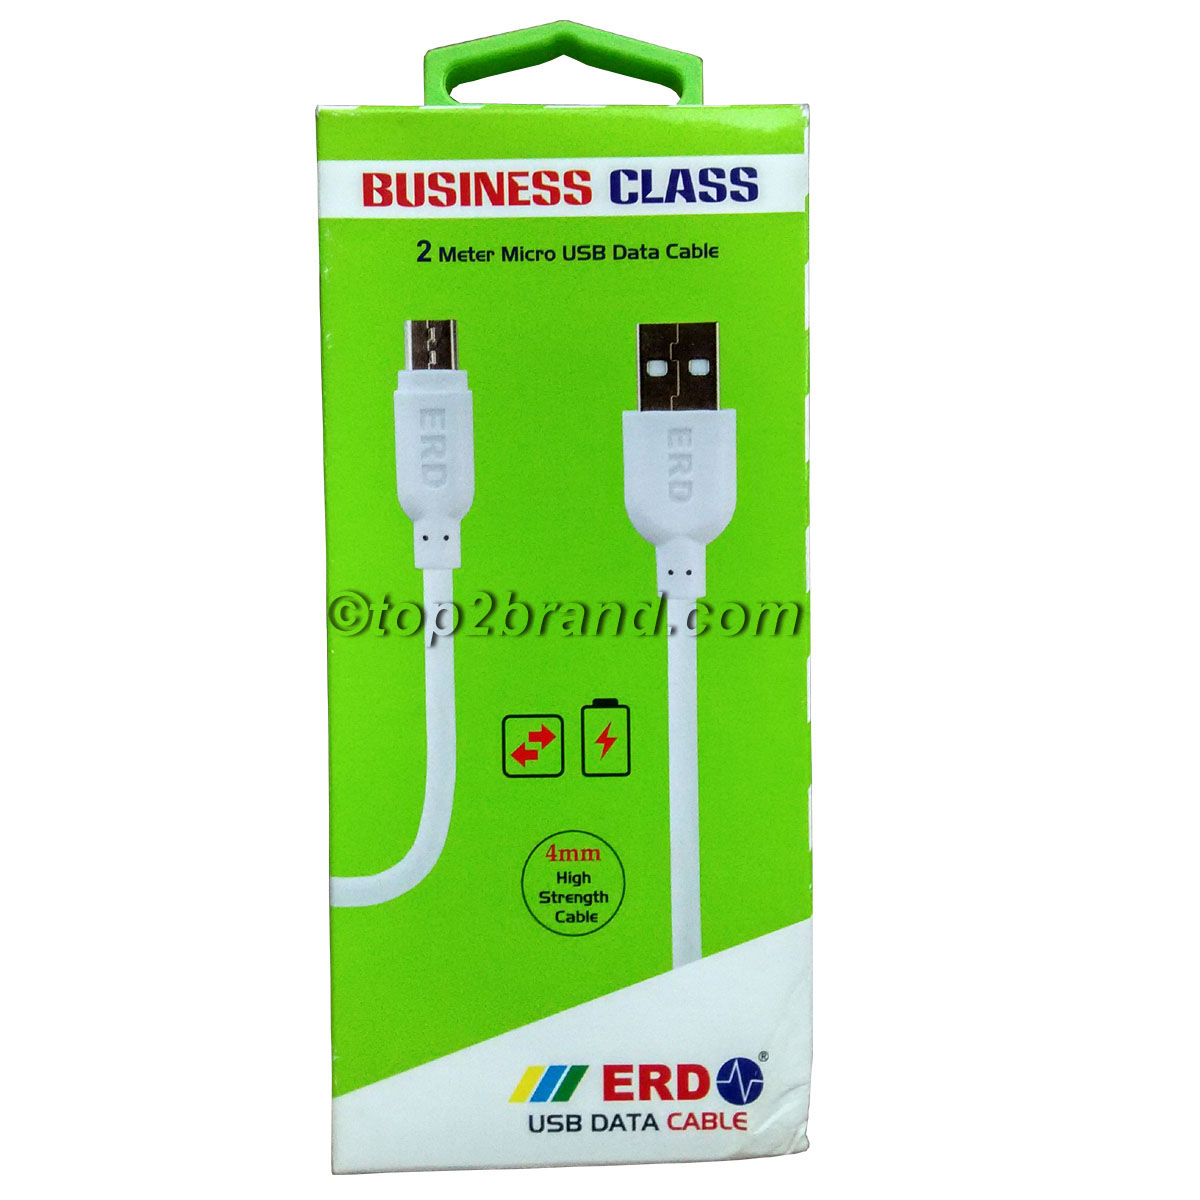 Erd cable price